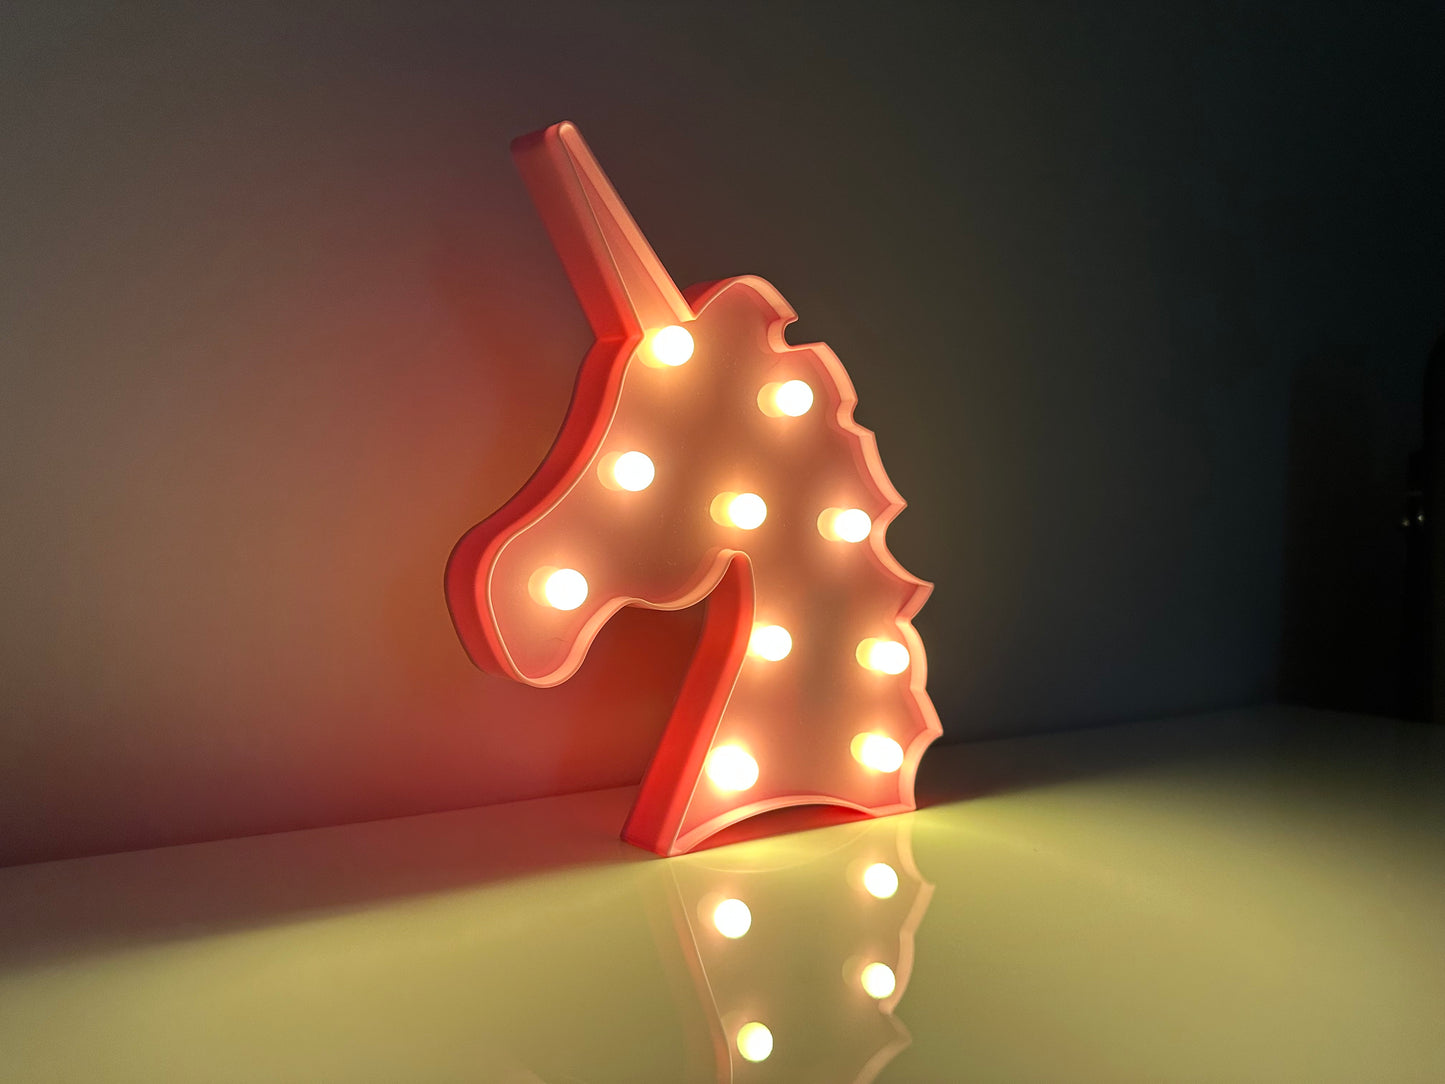 LED Unicorn Sign Light, Warm White LED Lamp For Living Room & Bedroom, Table & Wall Christmas Decoration for Kids & Adults - Battery Powered - PINK